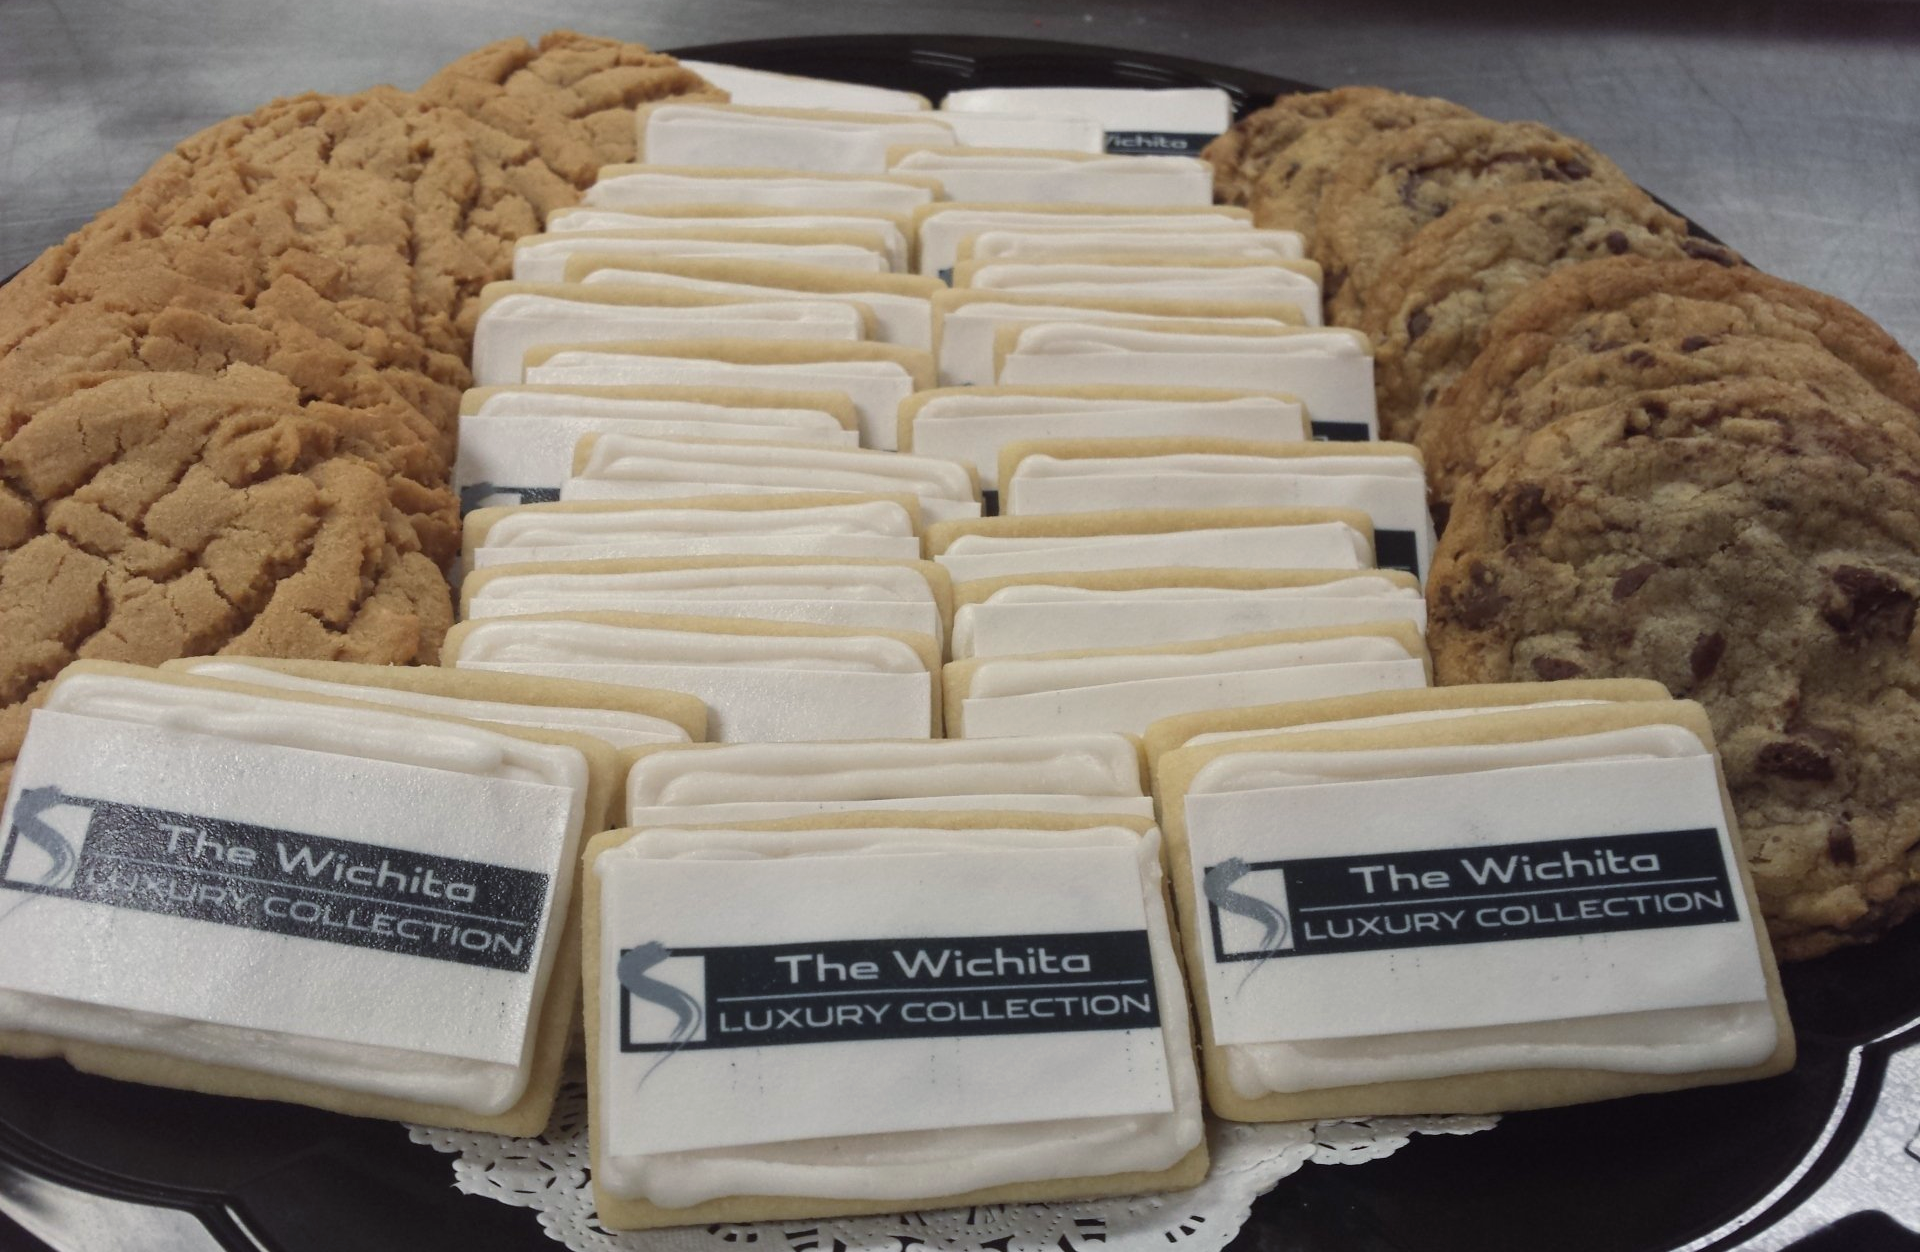 A cookie tray with chocolate chip cookies and rectangular sugar cookies with logos in the icing